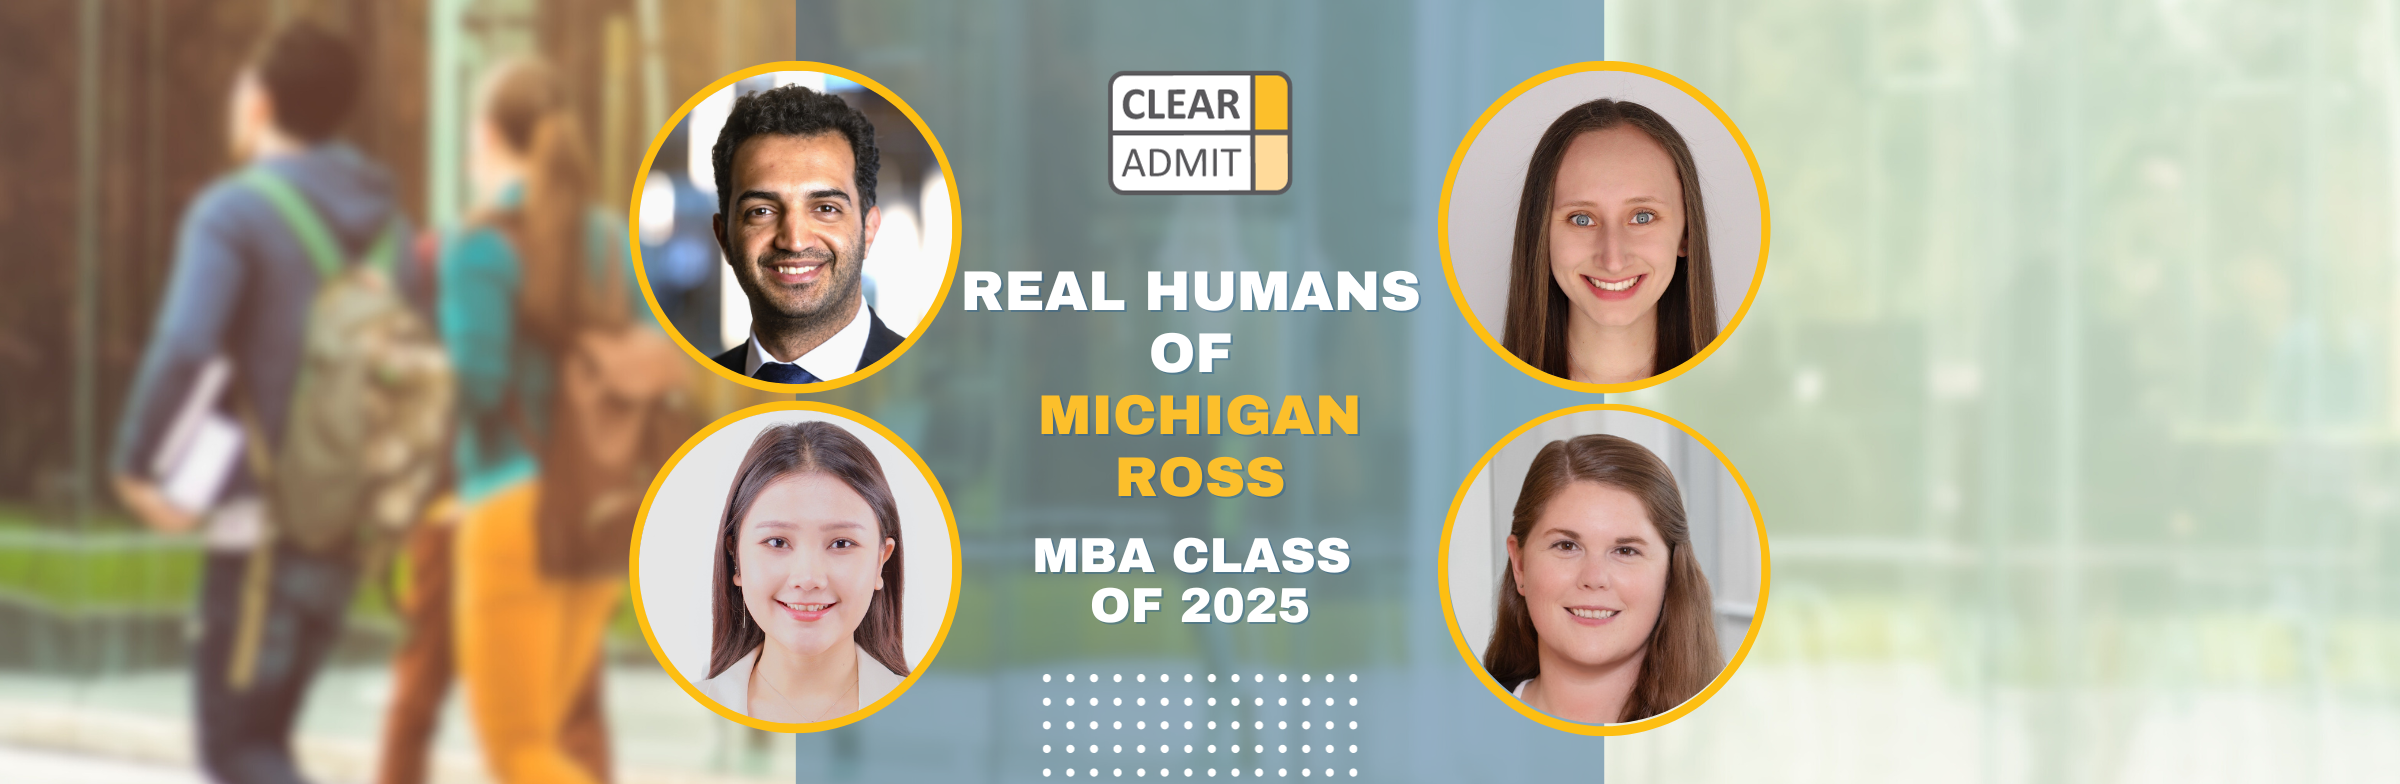 Image for Real Humans of the Michigan Ross School of Business MBA Class of 2025